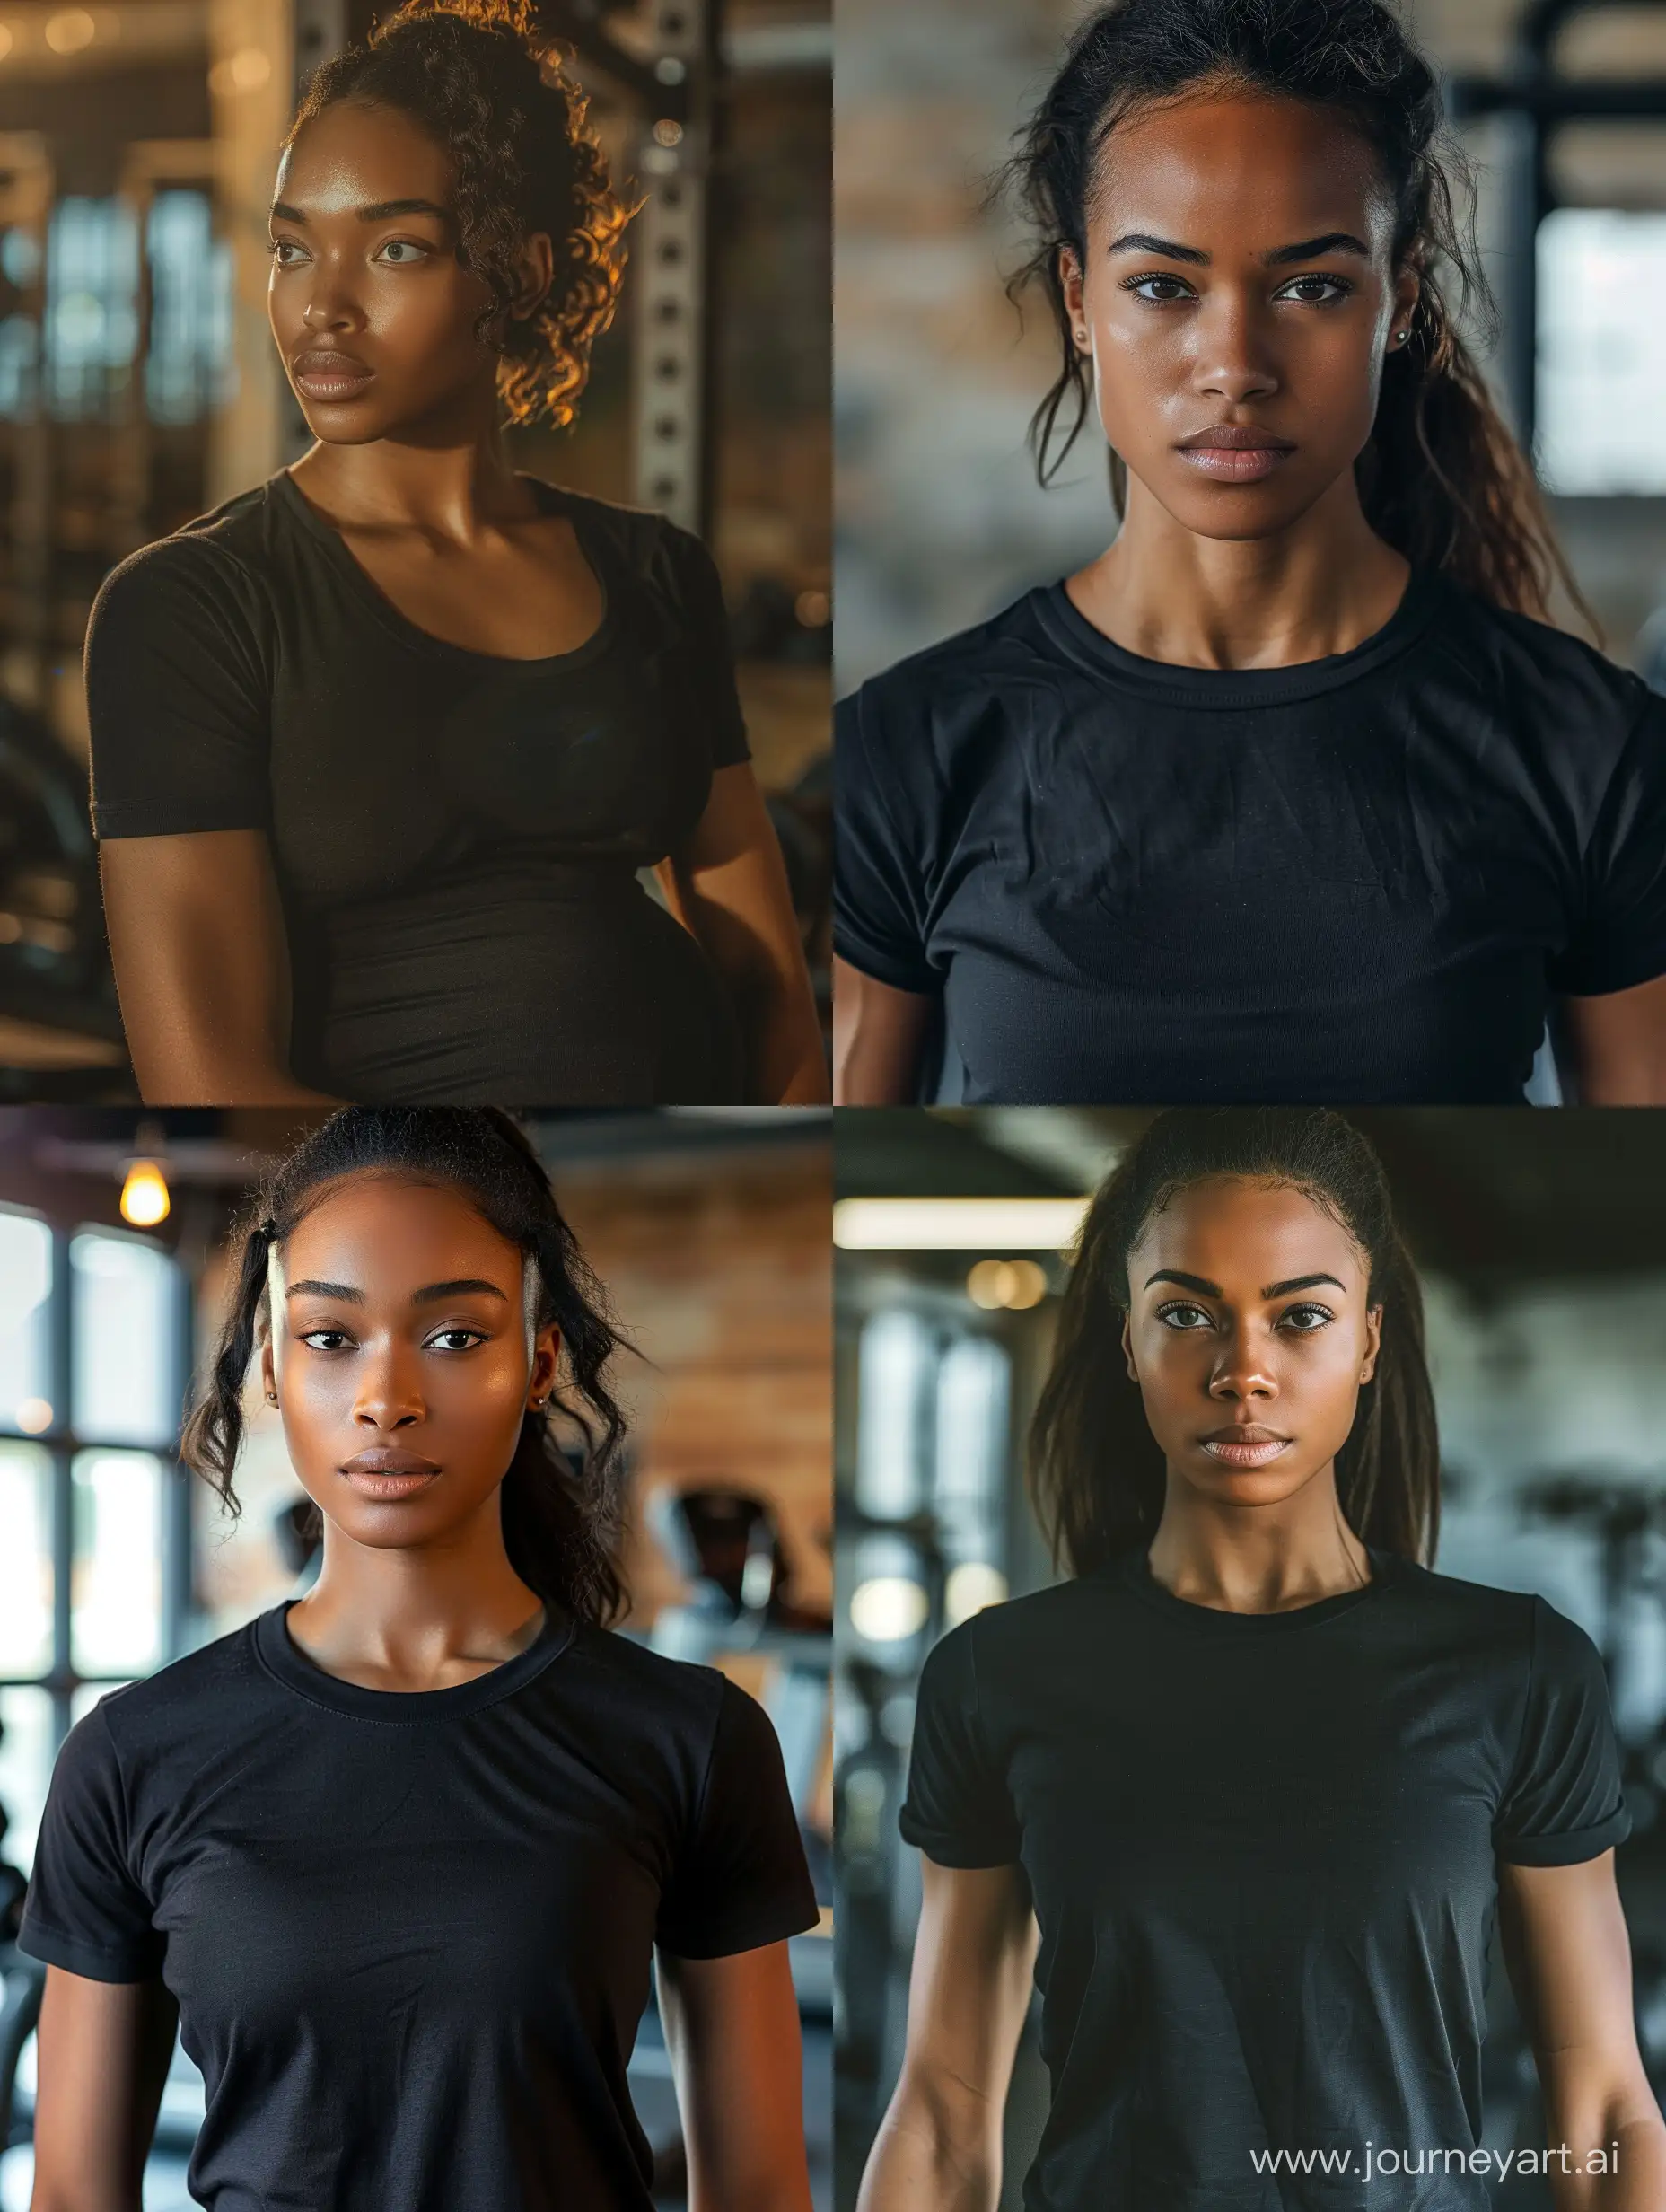 Fitness-Enthusiast-African-American-Woman-in-Stylish-Workout-Attire-at-the-Gym